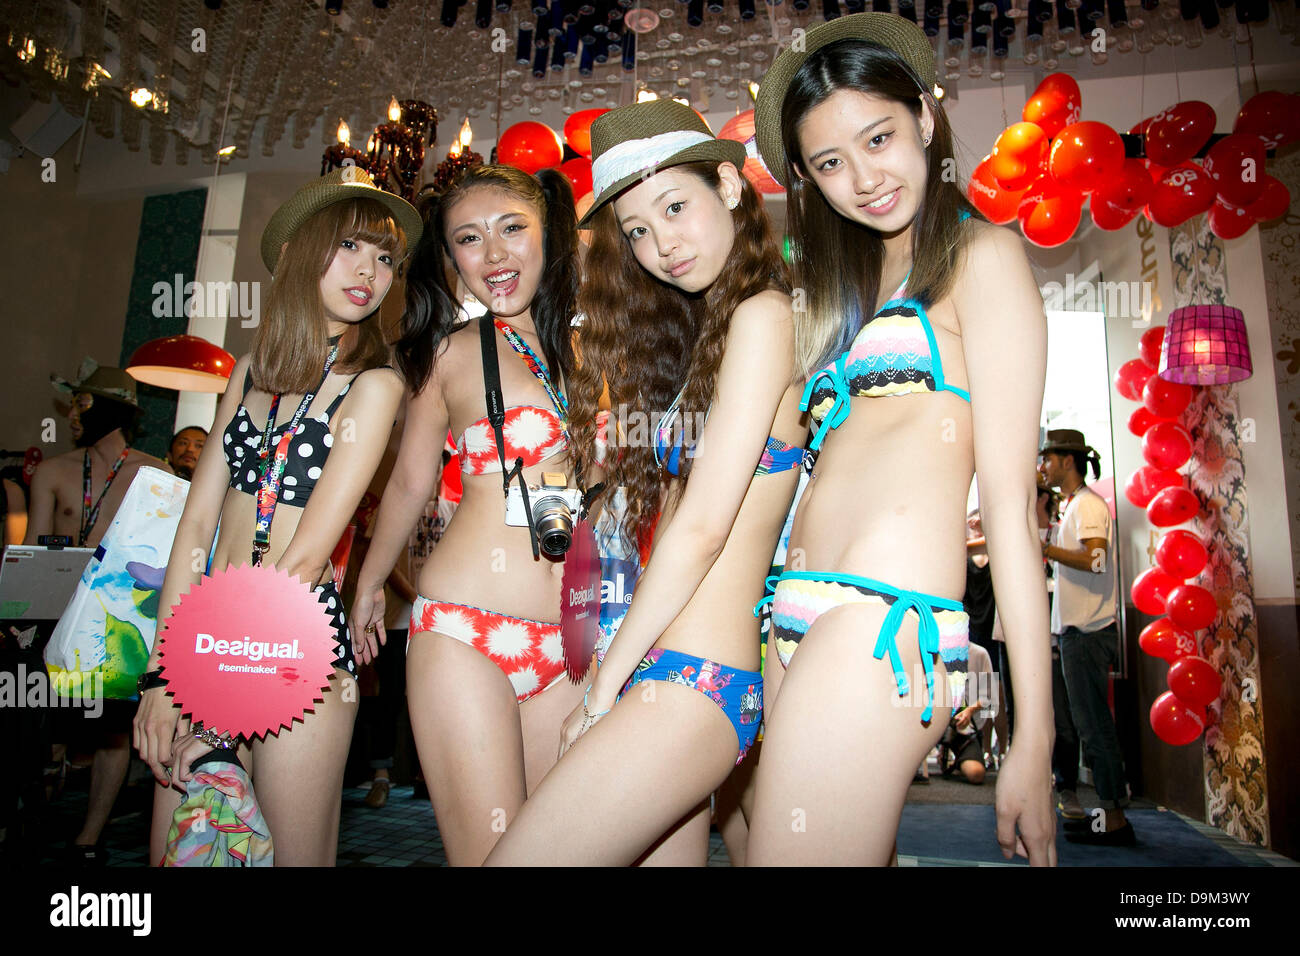 Tokyo, Japan. 22nd June 2013. Customers in swimsuit pose for cameras inside  the Desigual store in Tokyo's Harajuku fashion district. A fashion chain  called "Seminaked Party by Desigual" offers the first 100